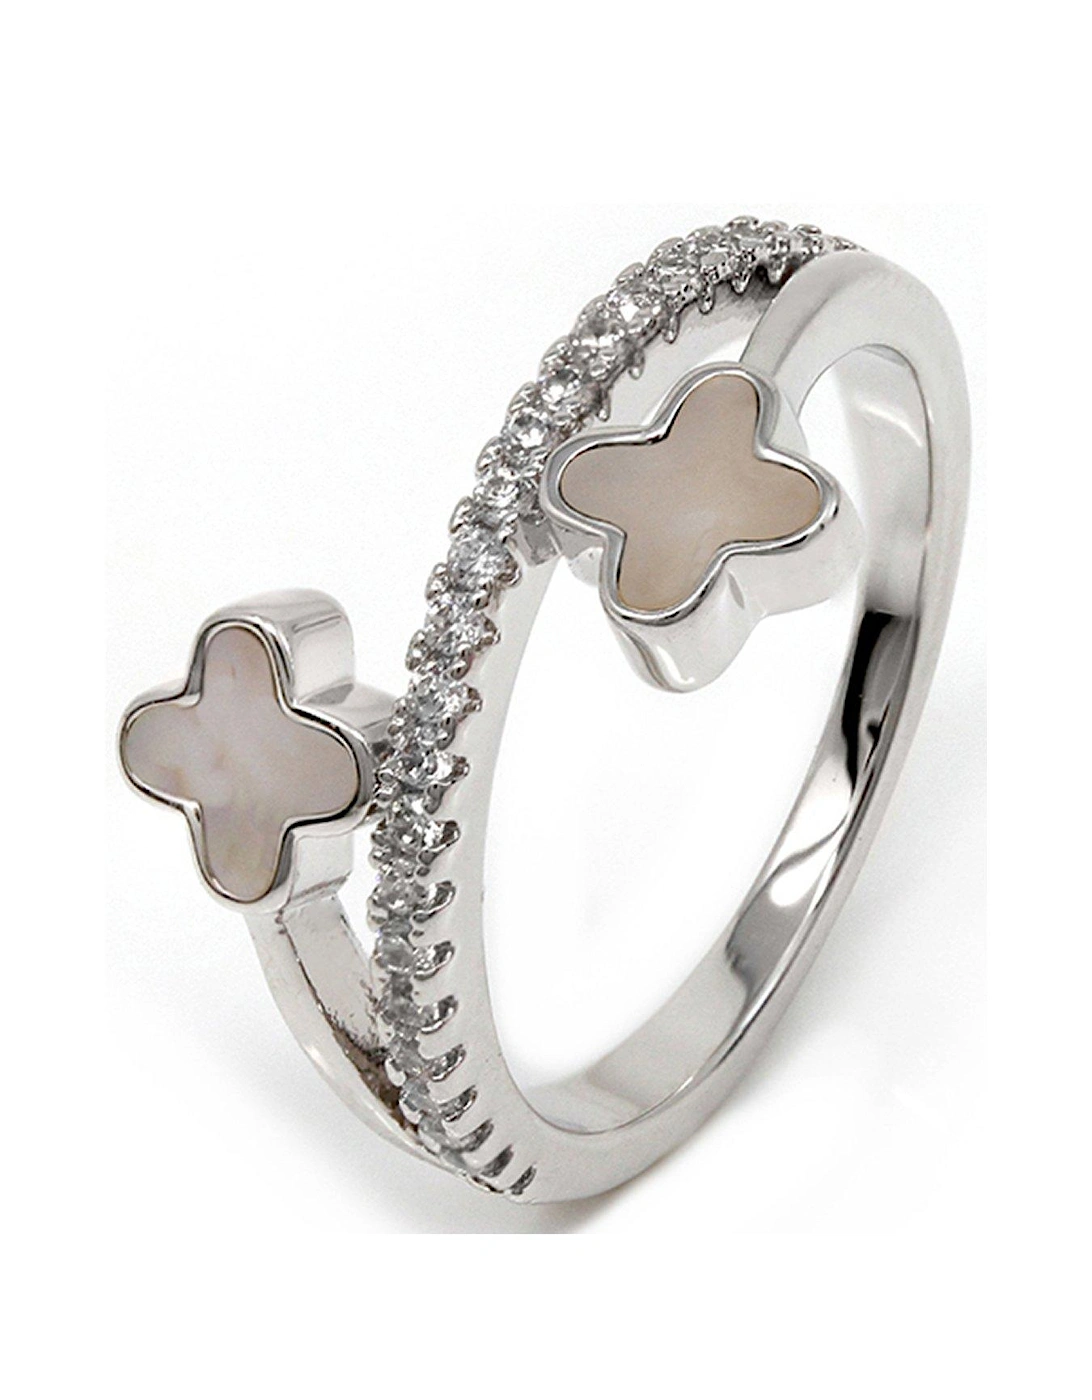 Adjustable Luck Ring - Silver & Pearl, 2 of 1